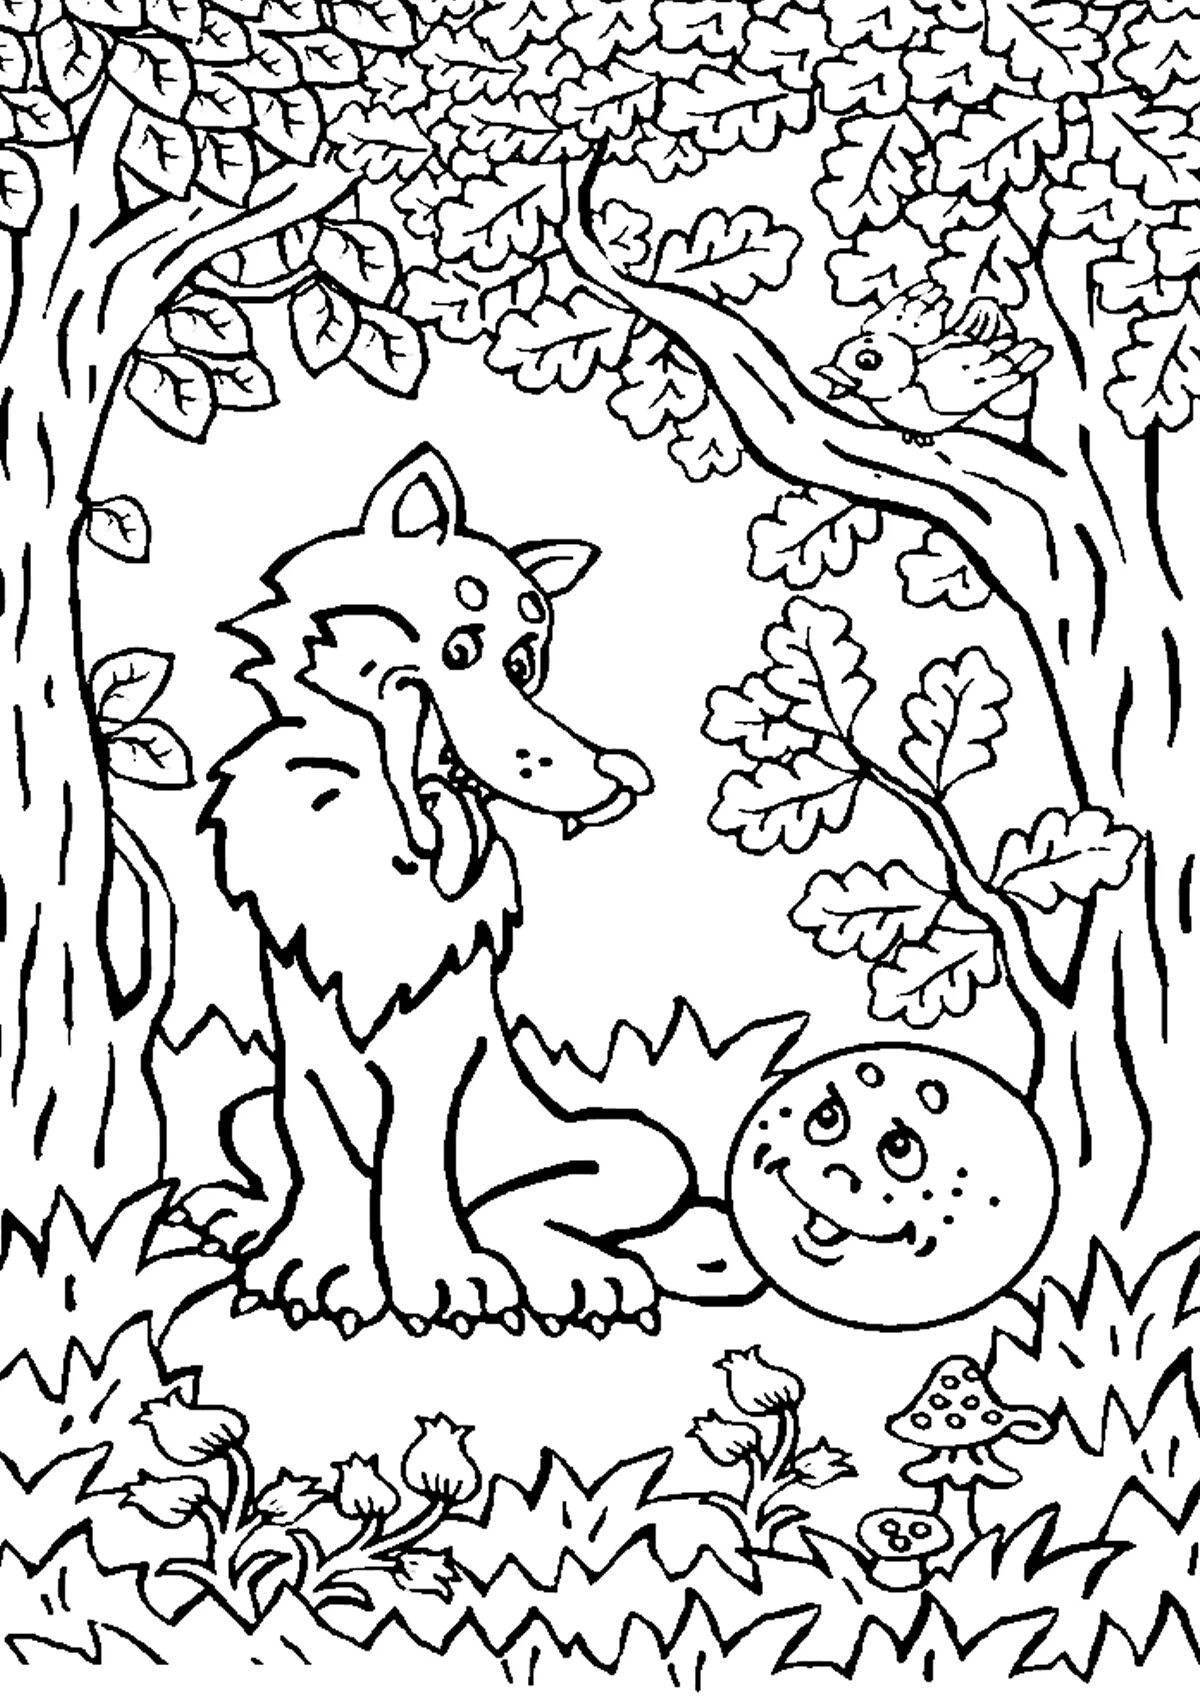 Adorable fox and rabbit coloring book